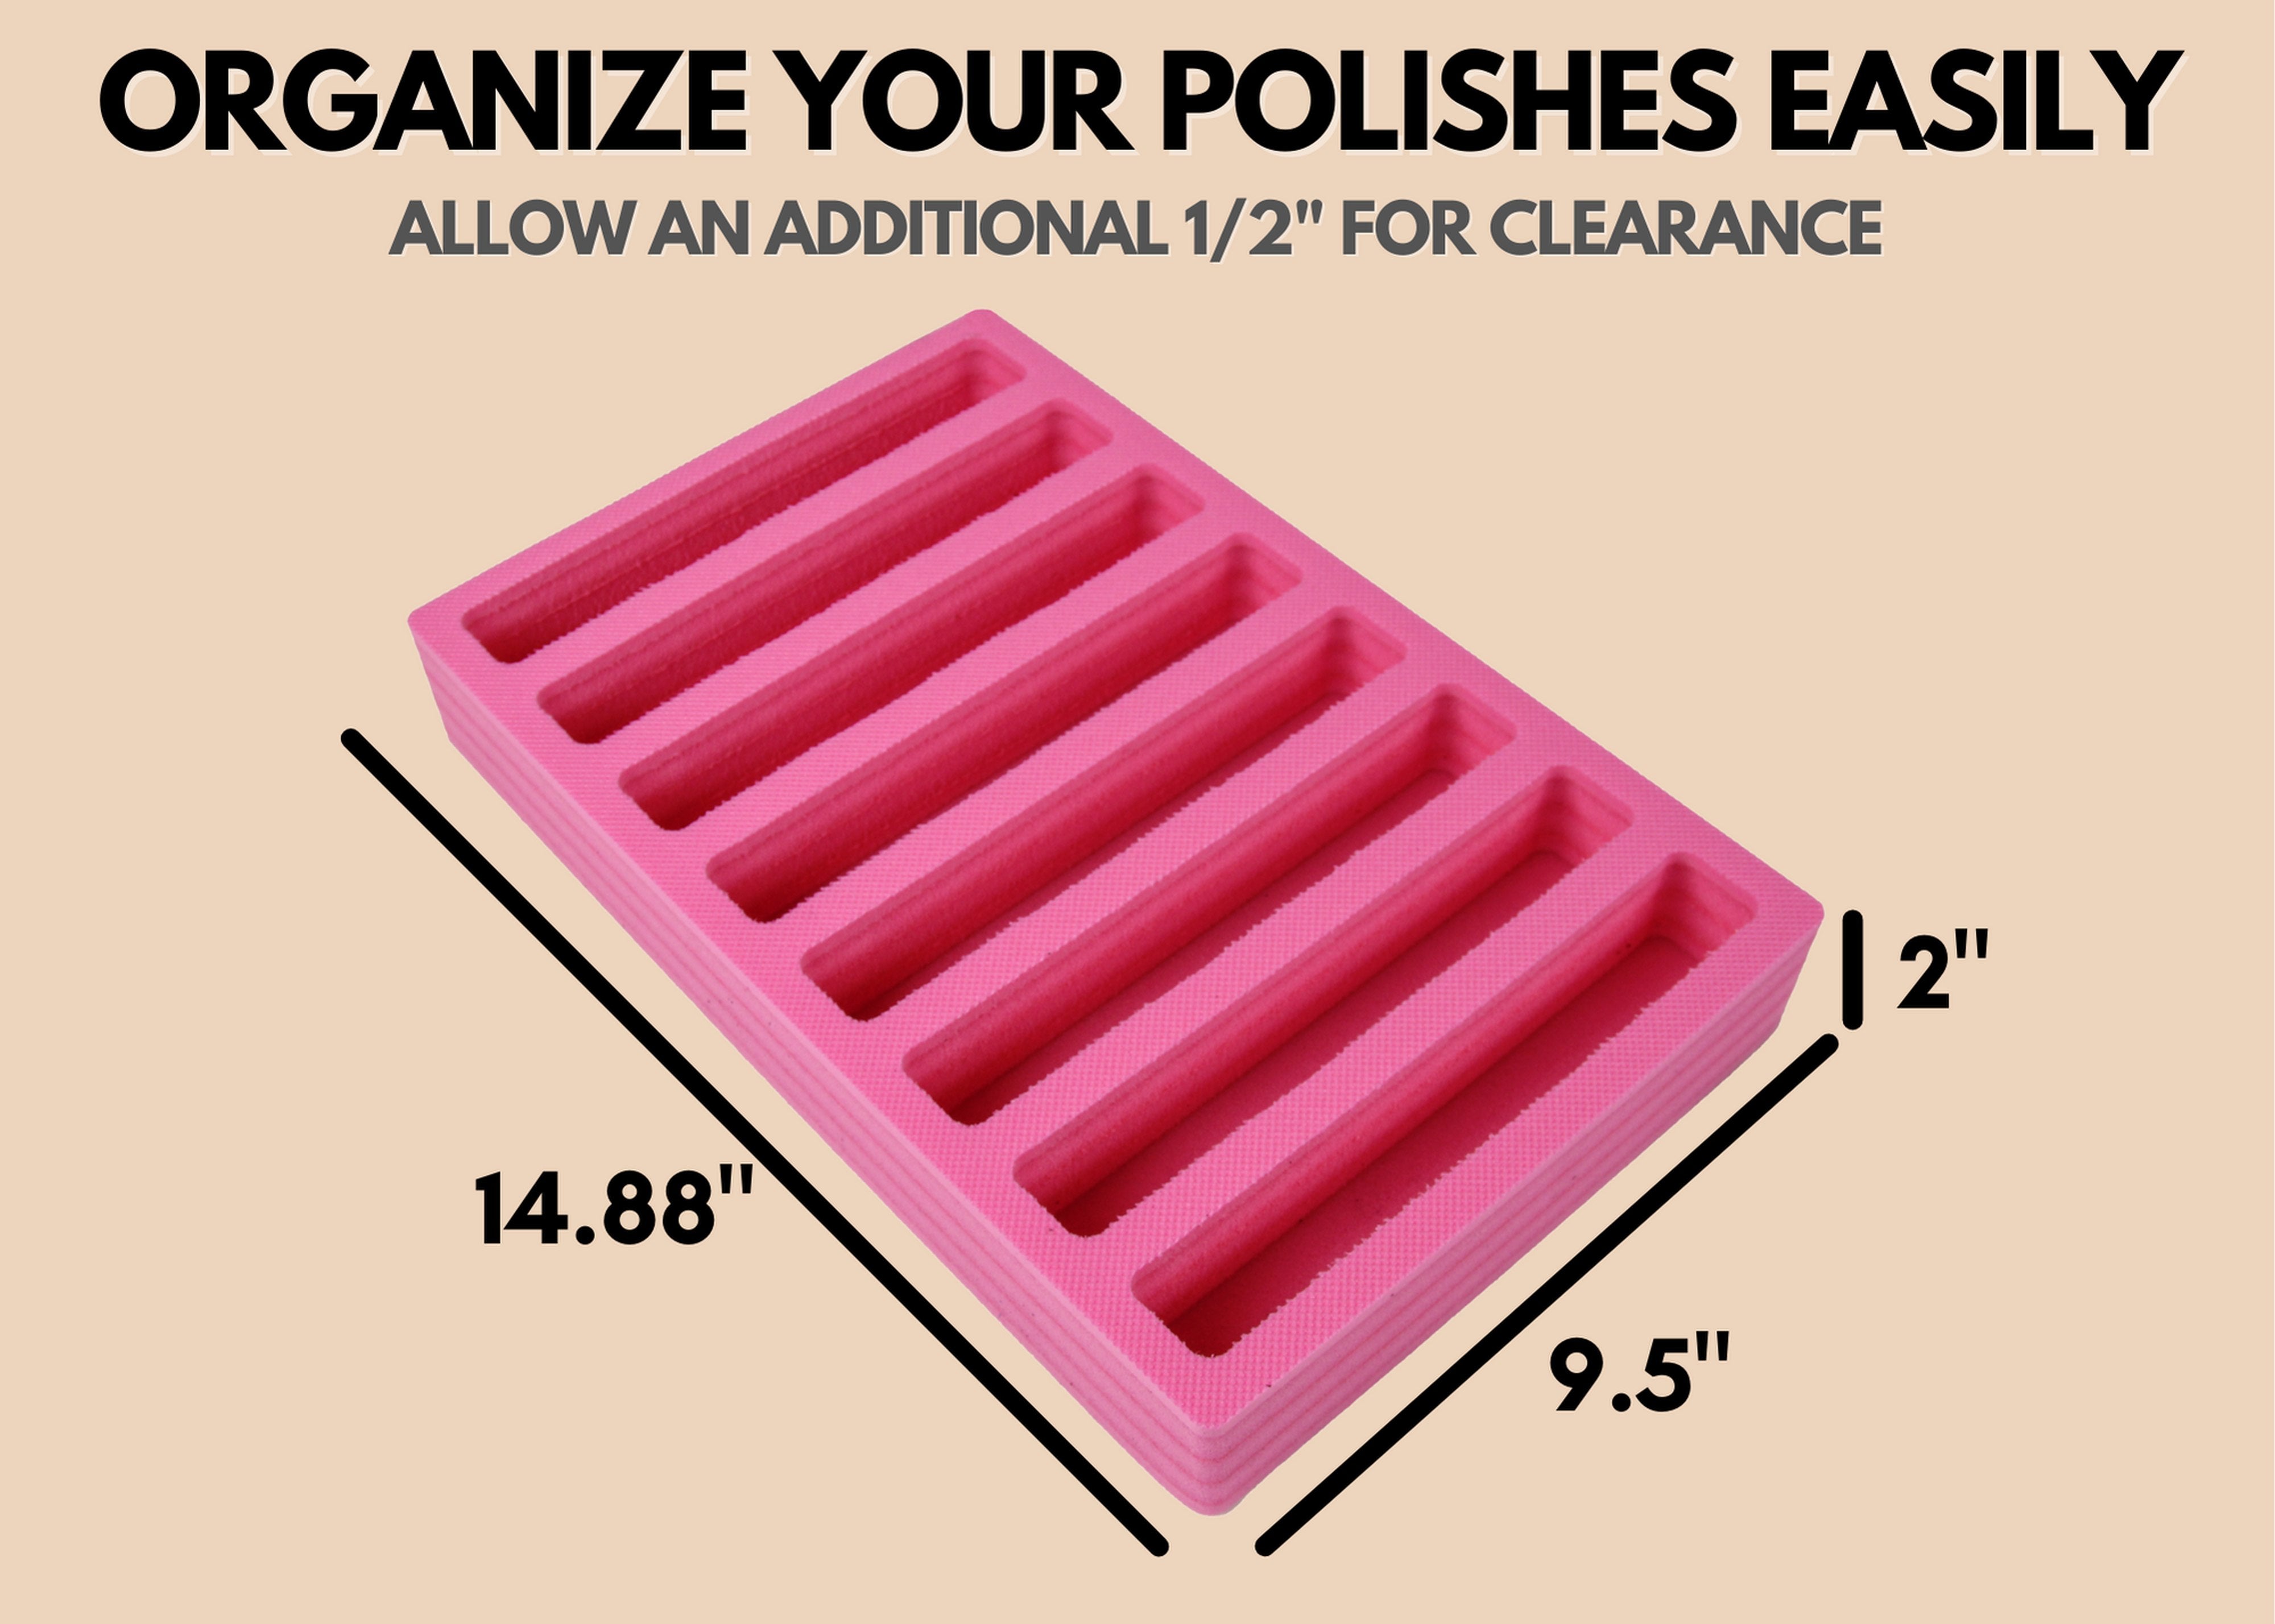 Polar Whale Nail Polish Drawer Organizer Tray Durable Pink Foam Washable Waterproof Insert for Home Bathroom Bedroom Office 9.5 x 14.9 Holds up to 48